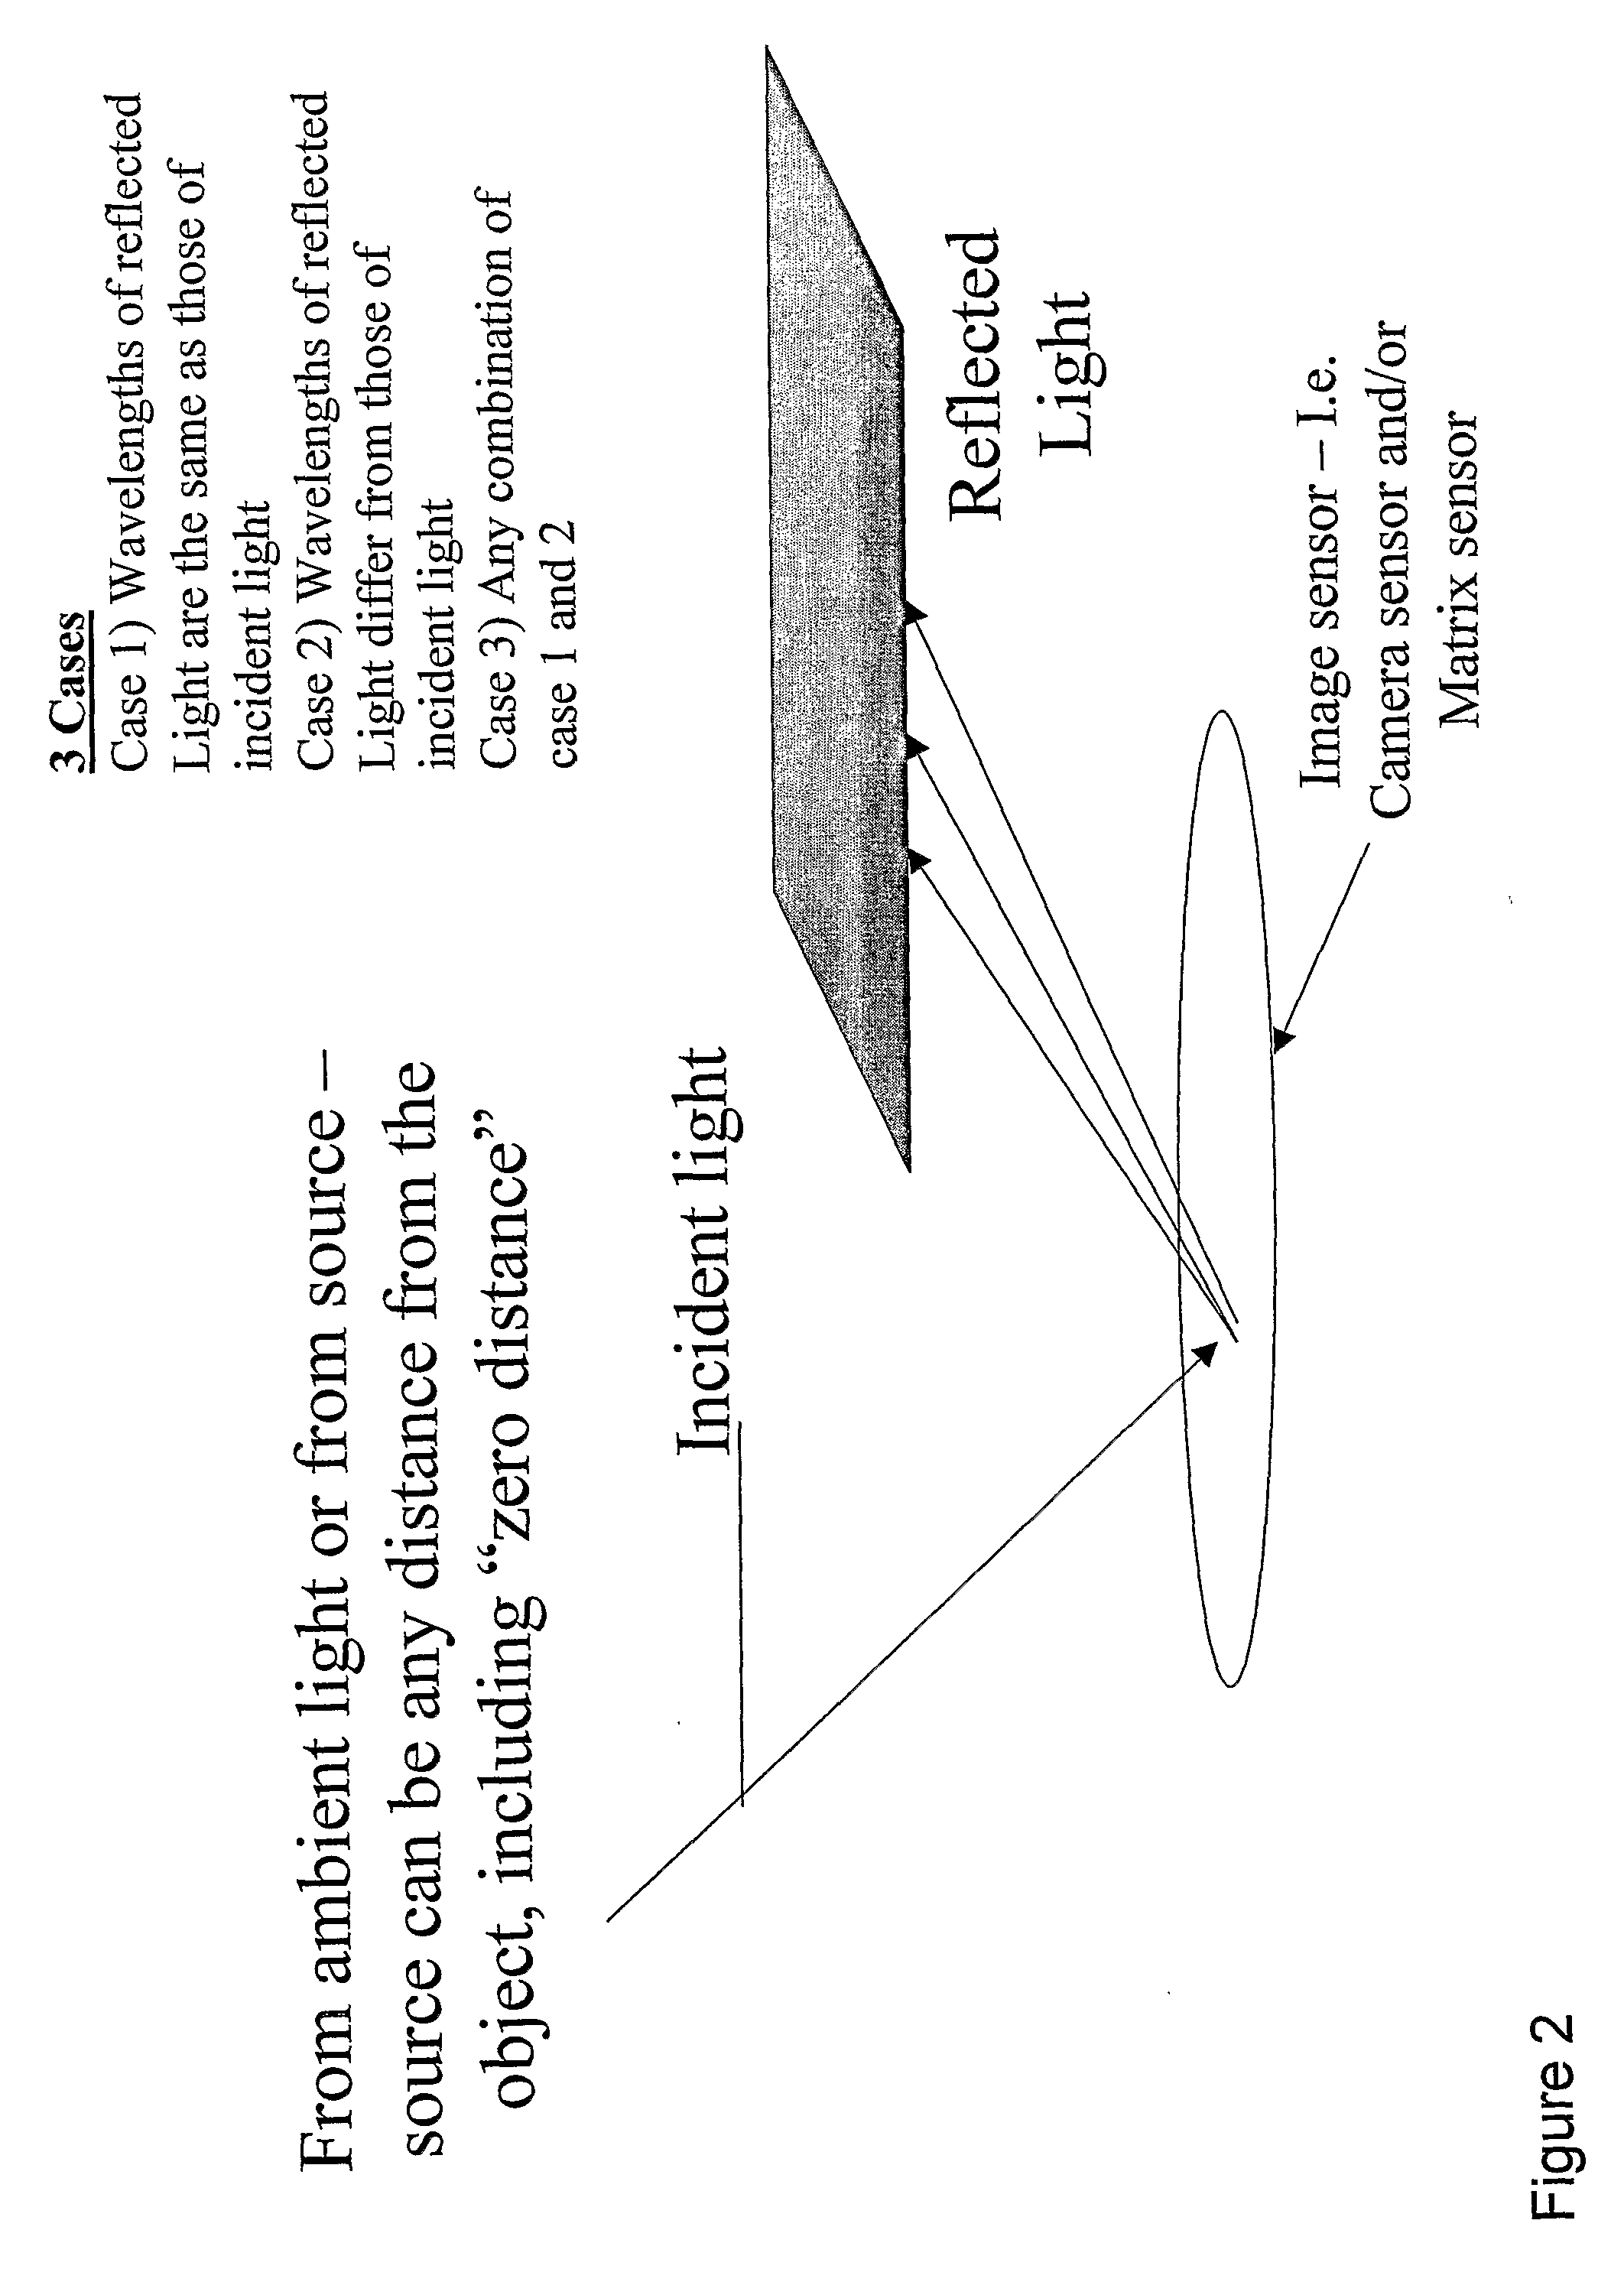 Optical sensor device and image processing unit for measuring chemical concentrations, chemical saturations and biophysical parameters